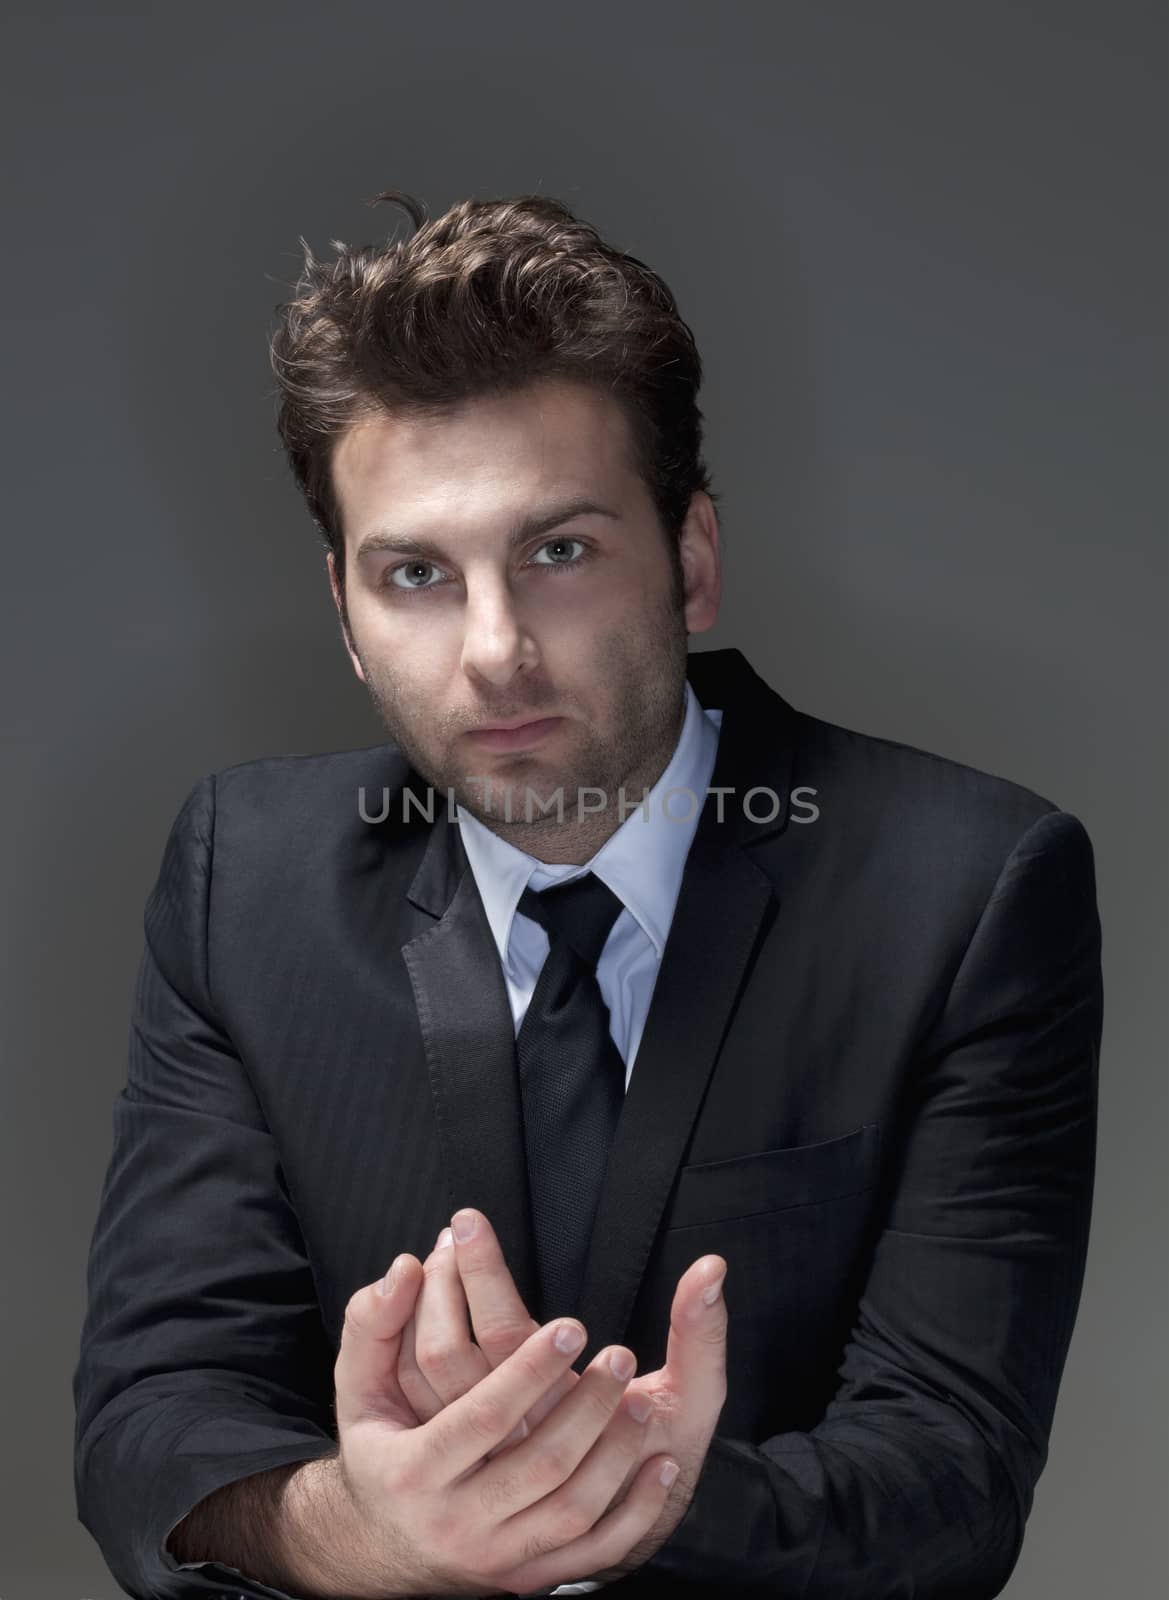 businessman in suit, shirt and tie, concerned, worried - isolated on gray